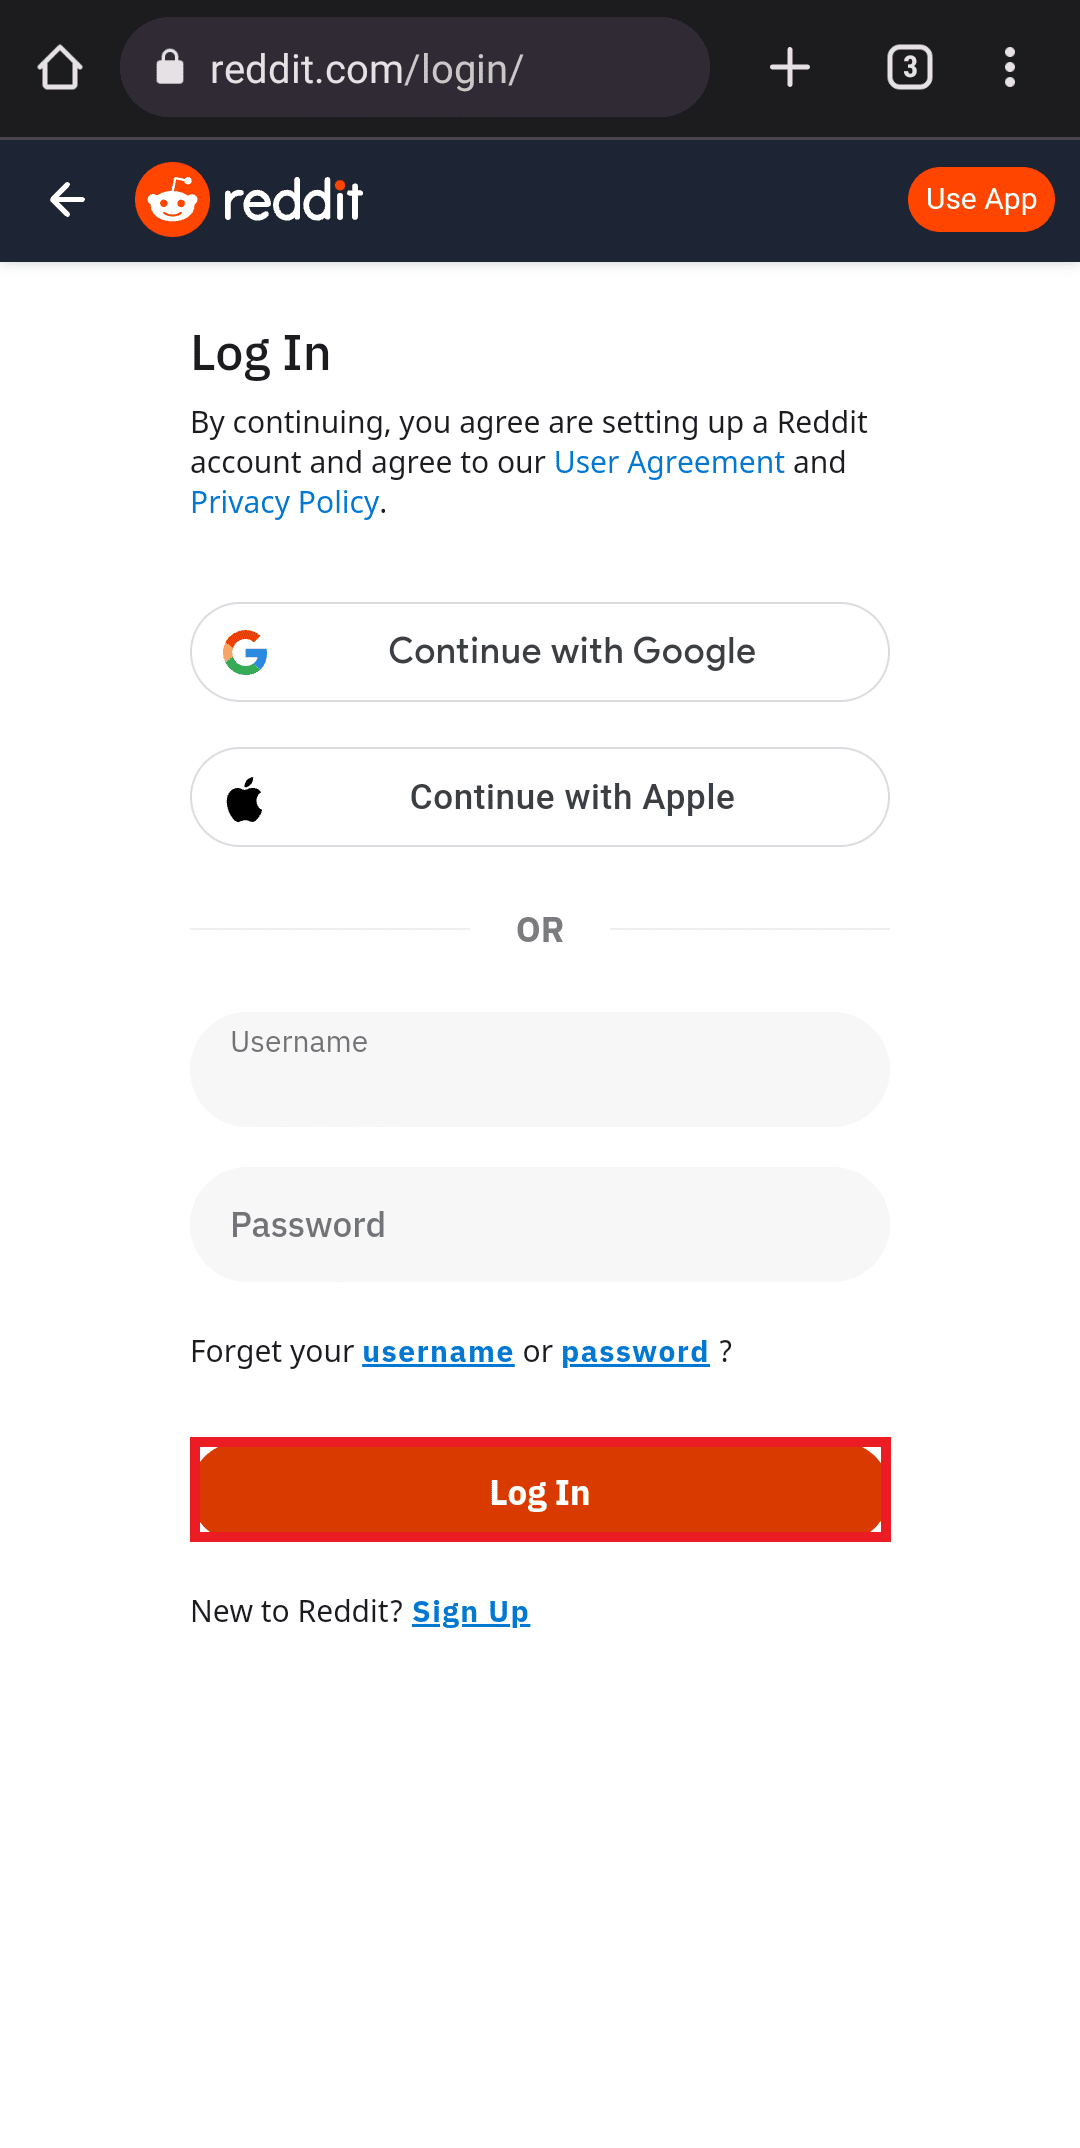 enter username and password and tap on log in